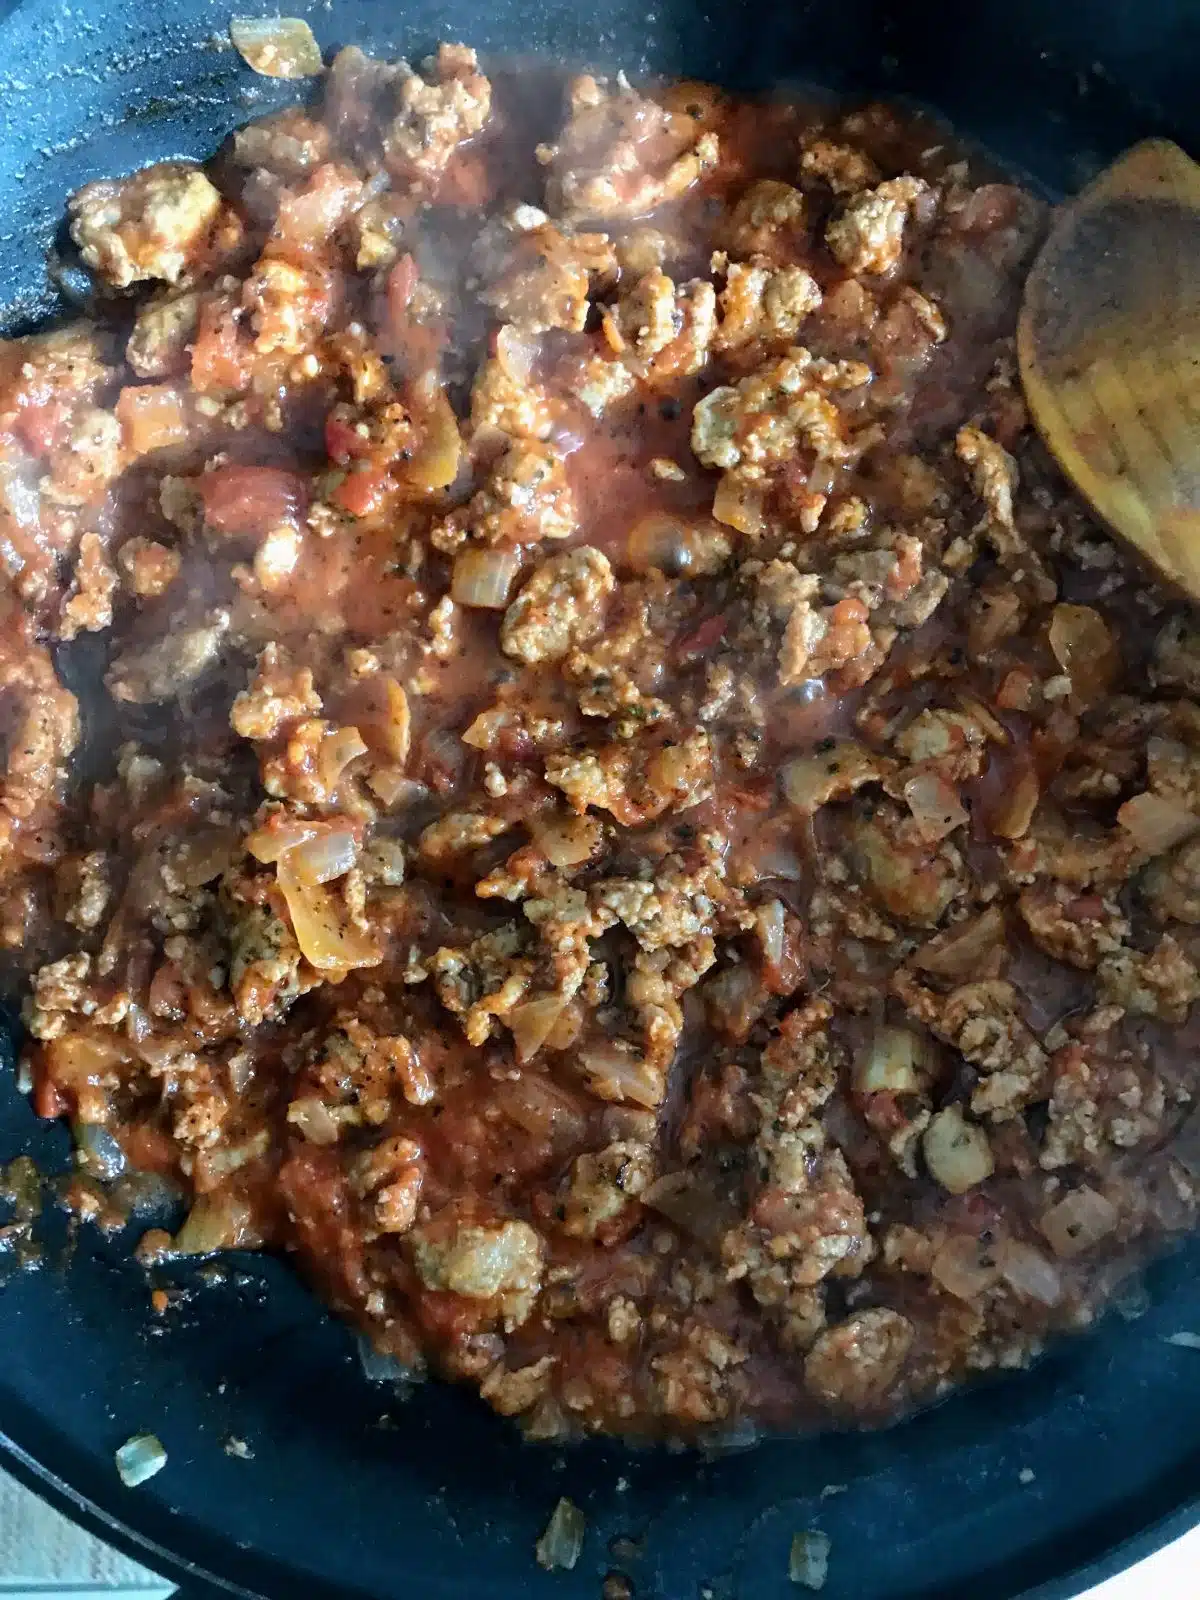 Italian sausage cooking with onions and tomato sauce.